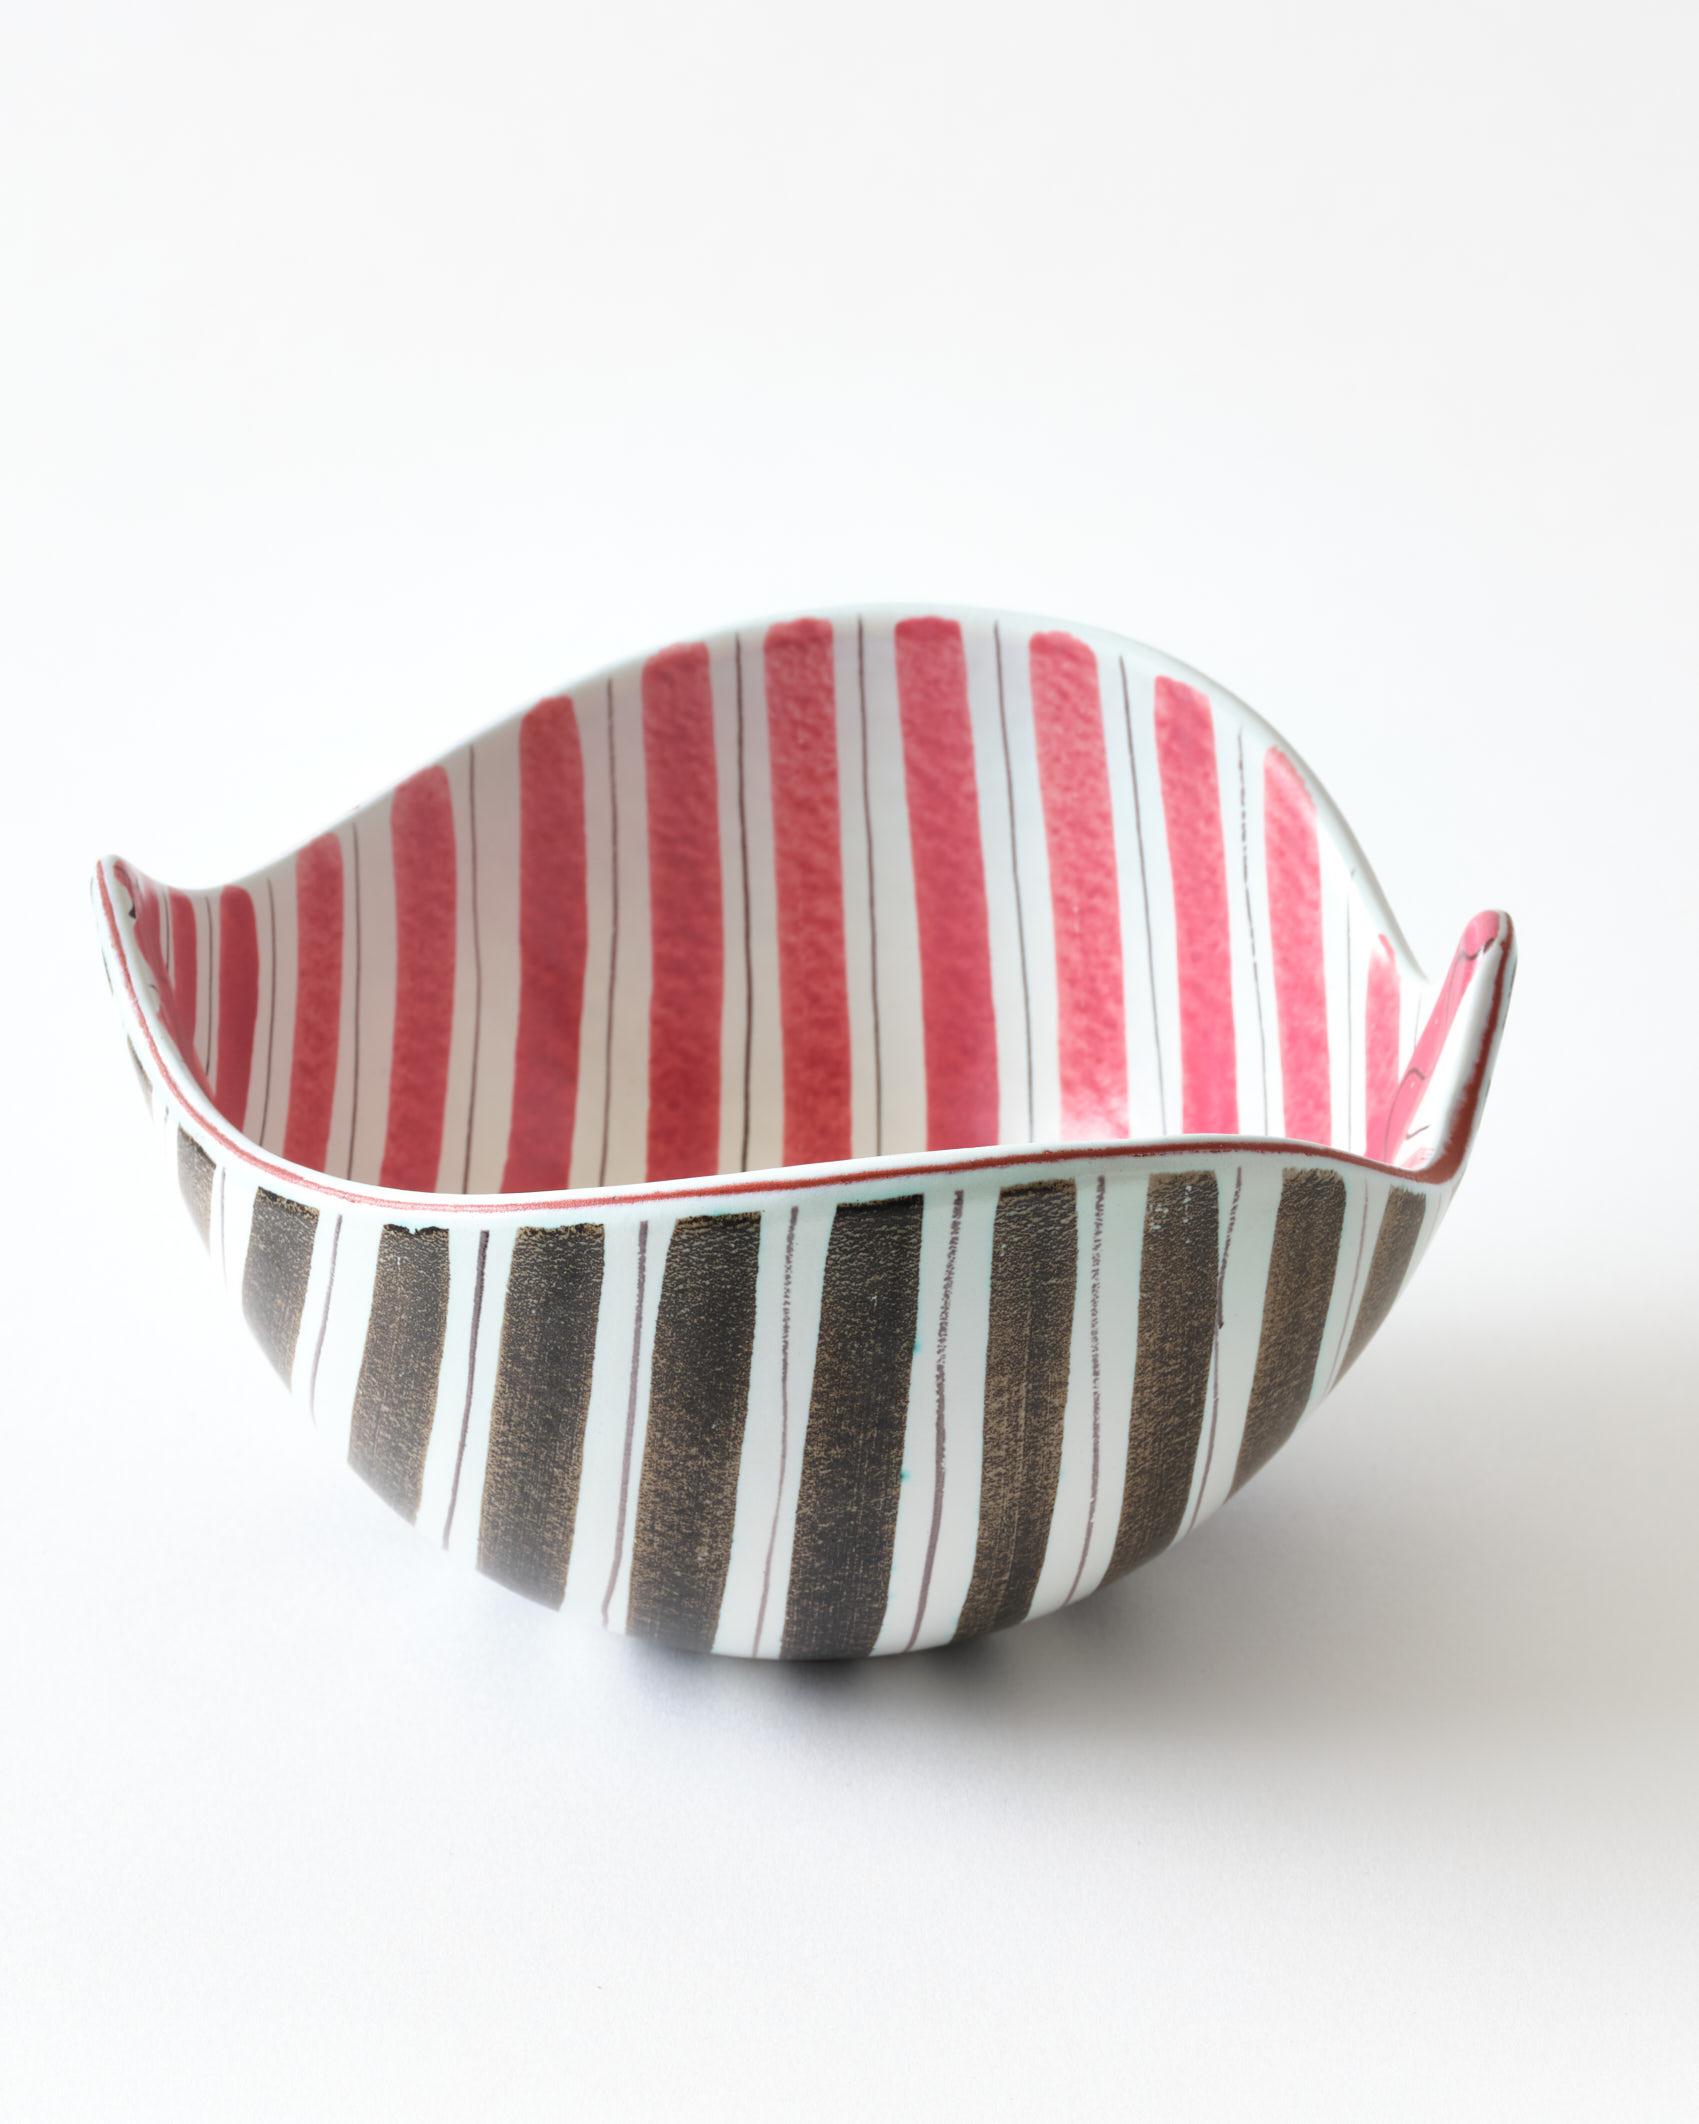 Hand-Crafted Ceramic Bowl by Stig Lindberg, Sweden, Red, Brown & White Striped, C 1950 For Sale